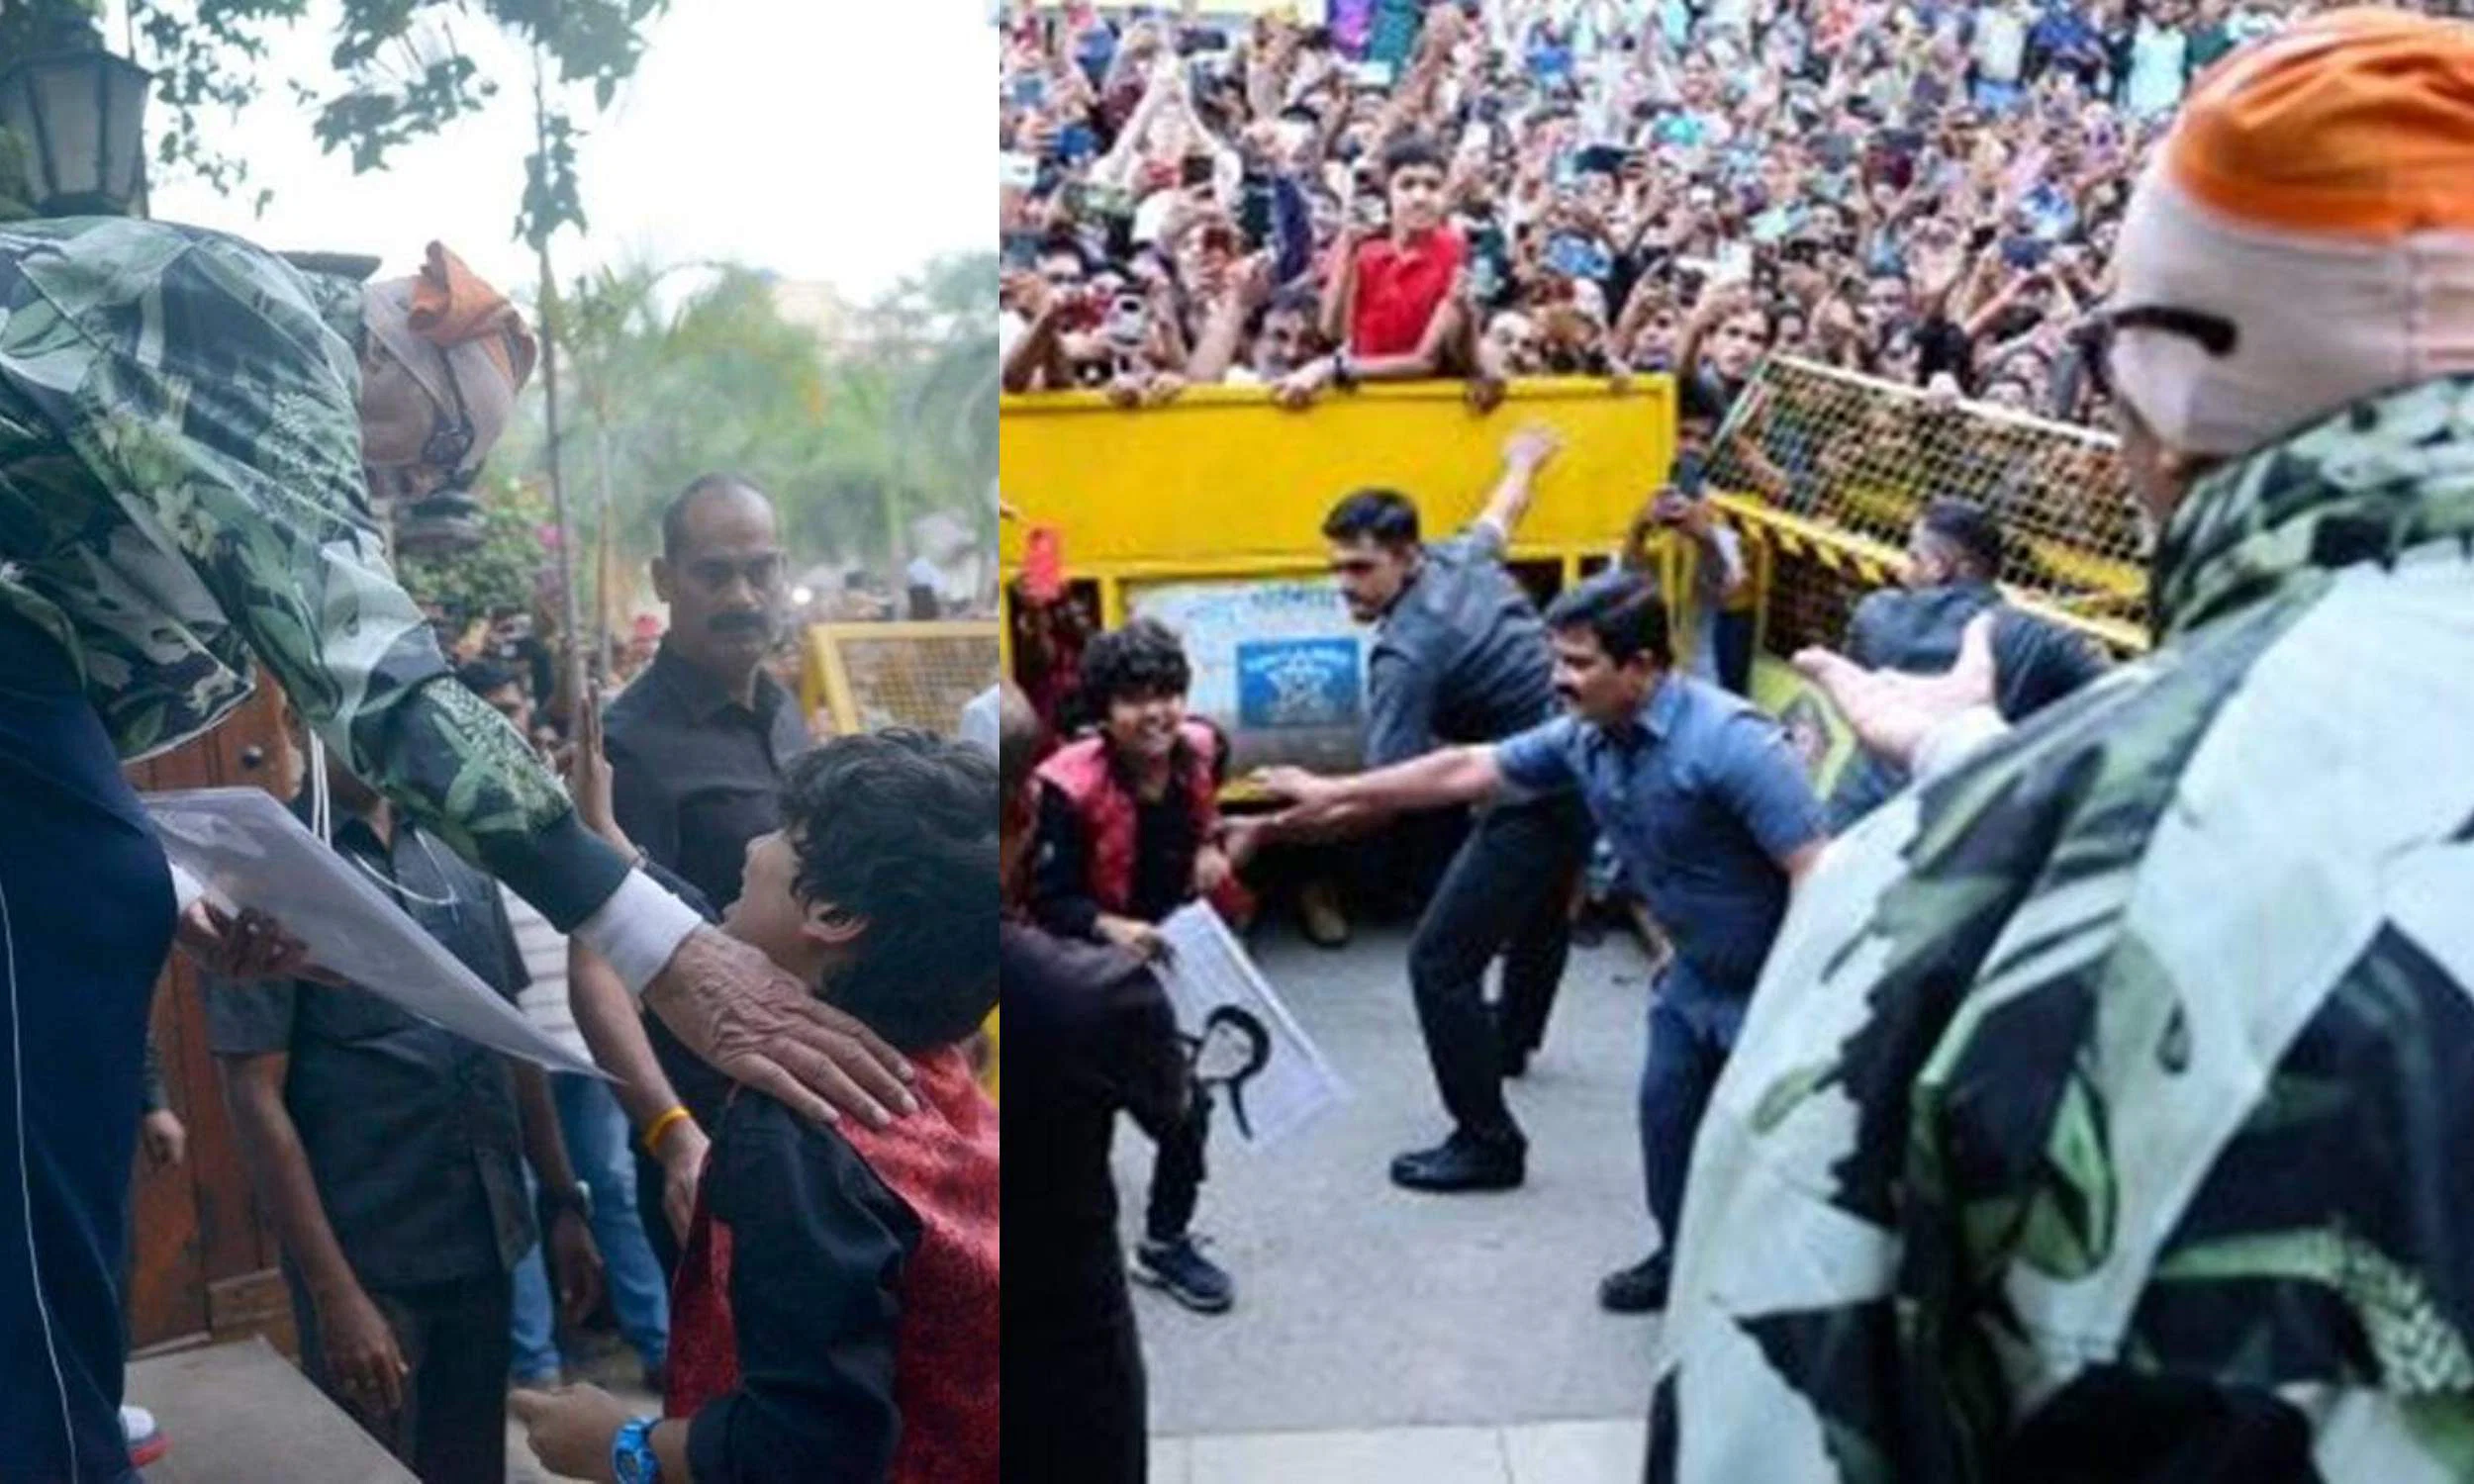 Amitabh Bachchan Becomes Emotional As A Young Fan Breaks Security Outside His House, Touches His Feet